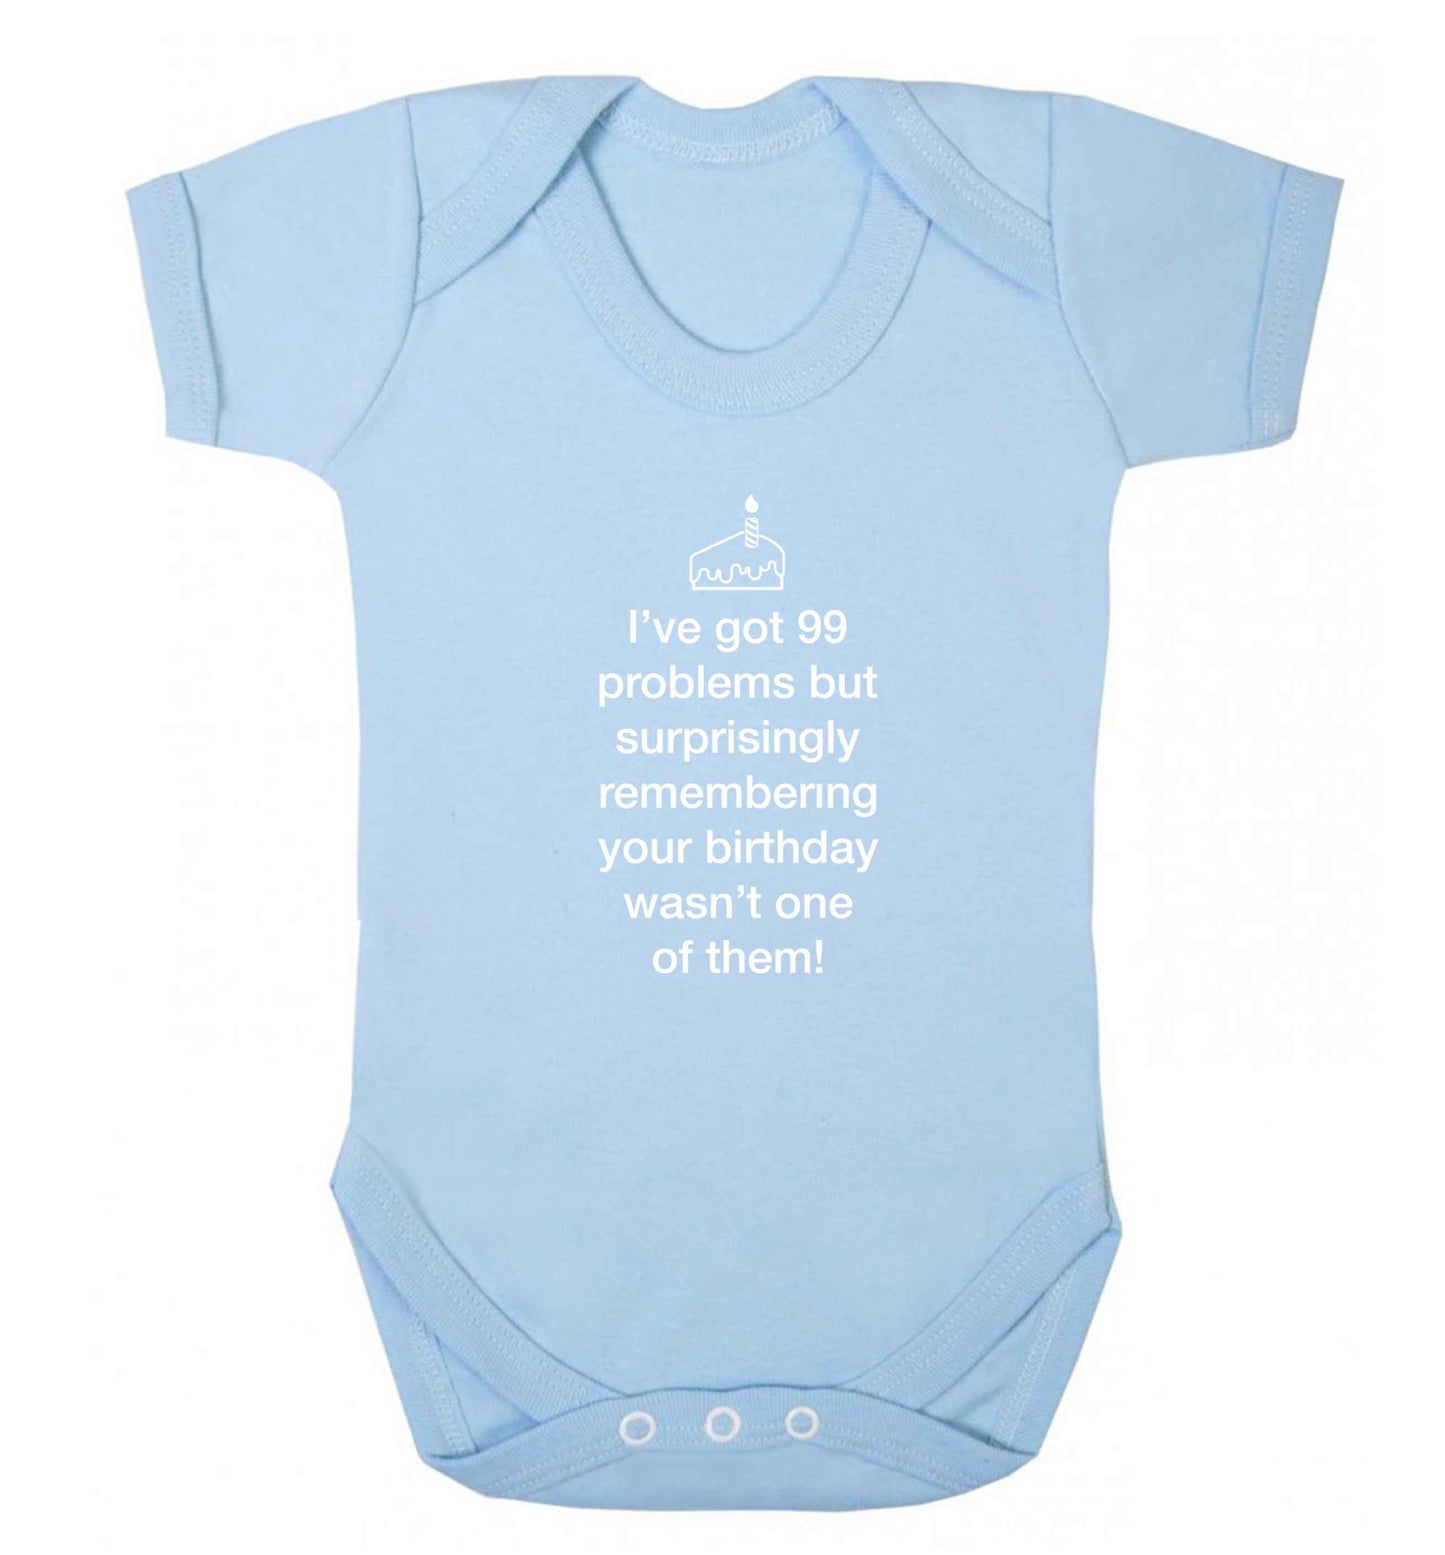 I've got 99 problems but surprisingly remembering your birthday wasn't one of them! baby vest pale blue 18-24 months